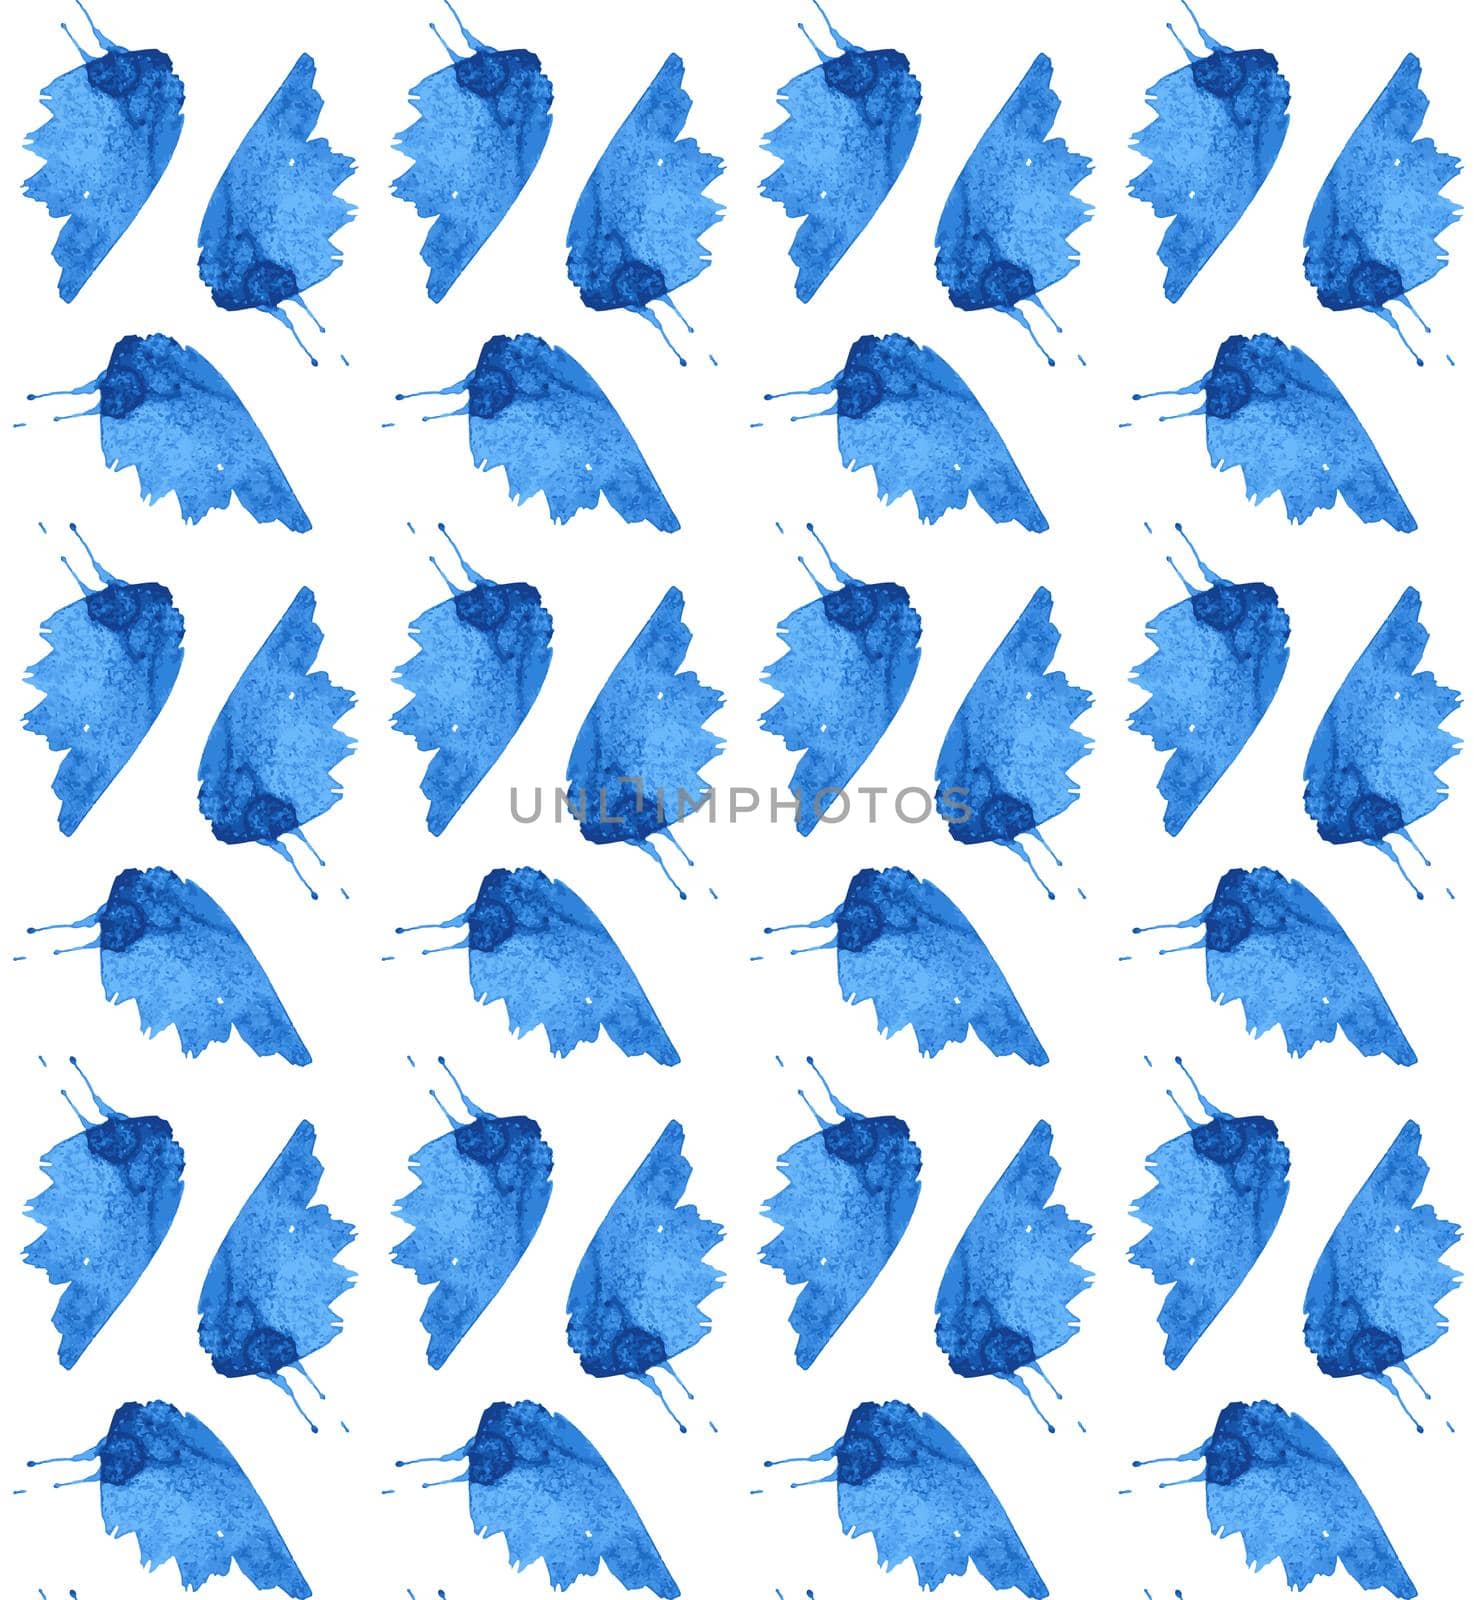 butterflies pattern. floral illustration on white background by mlanaa